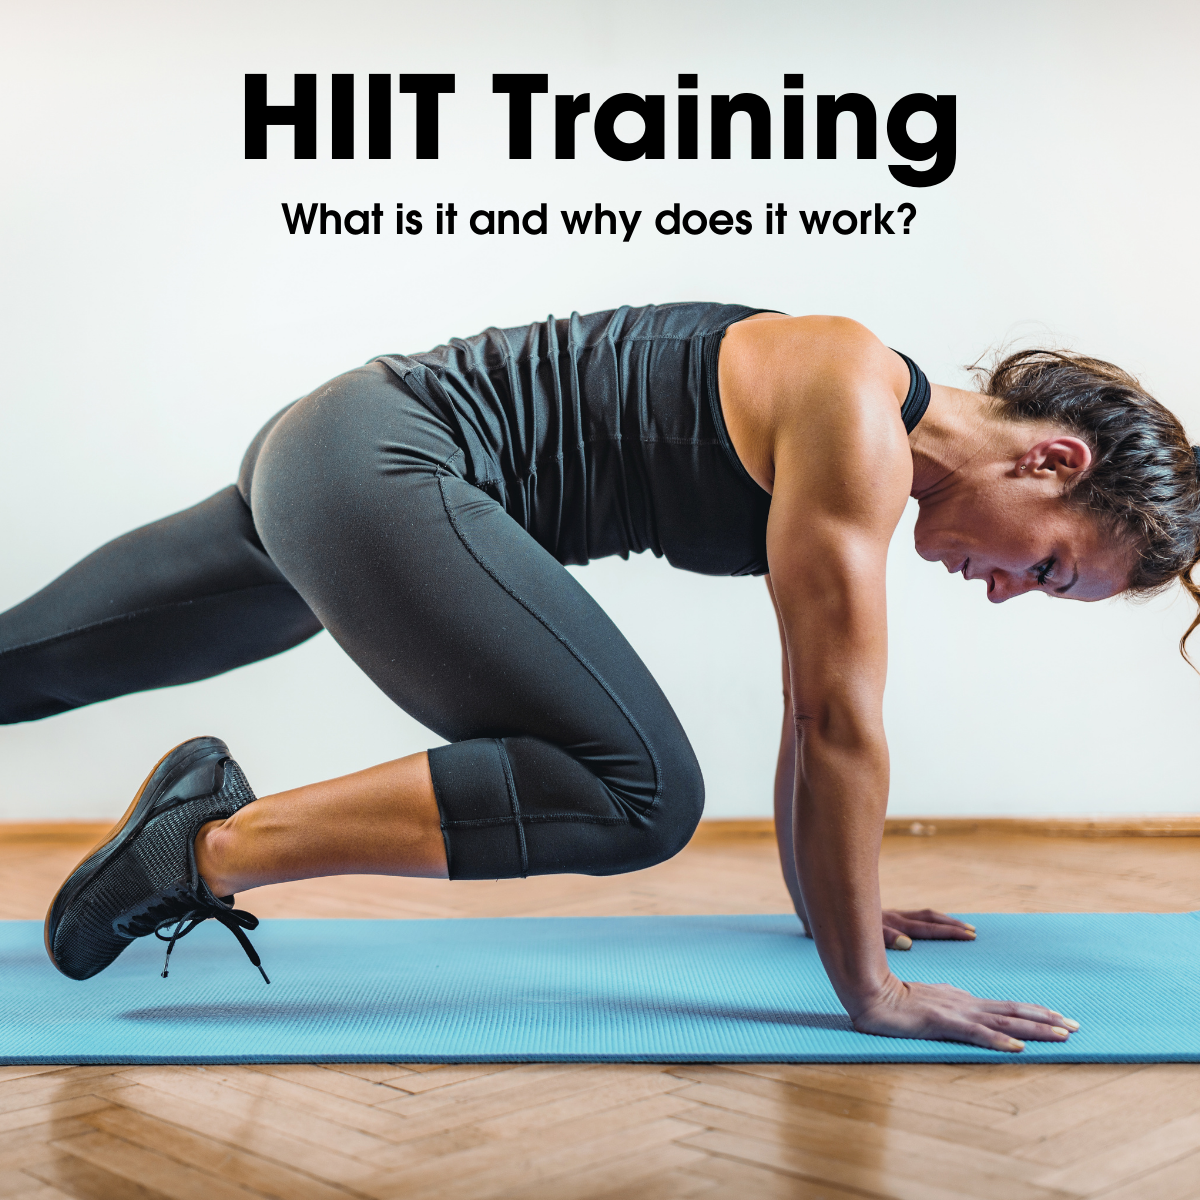 What is HIIT training? And why does it work?